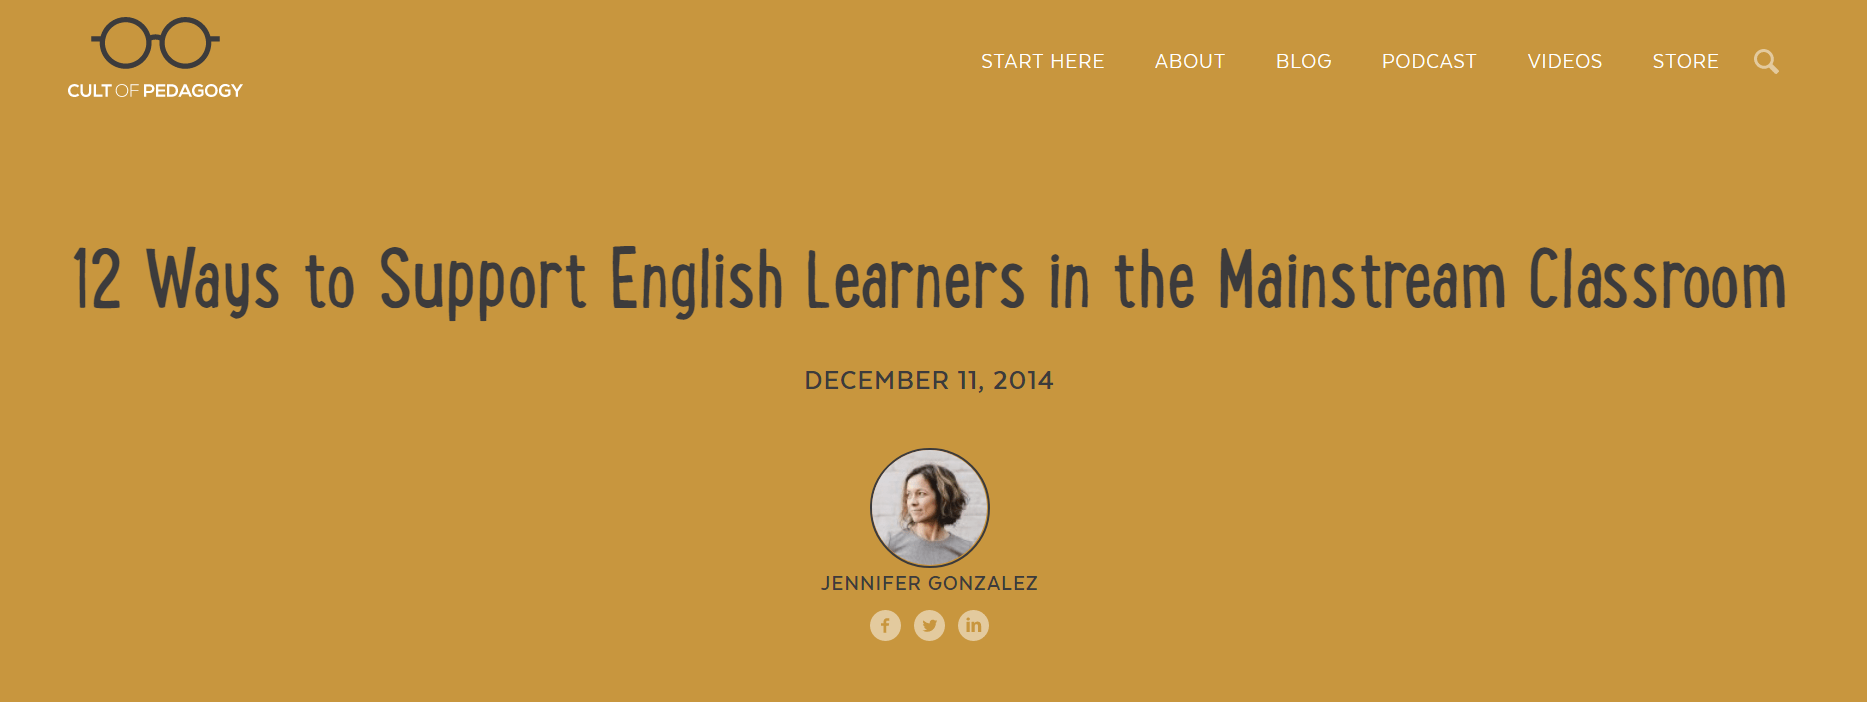 Cult of Pedagogy: “12 Ways to Support English Learners in the Mainstream Classroom”